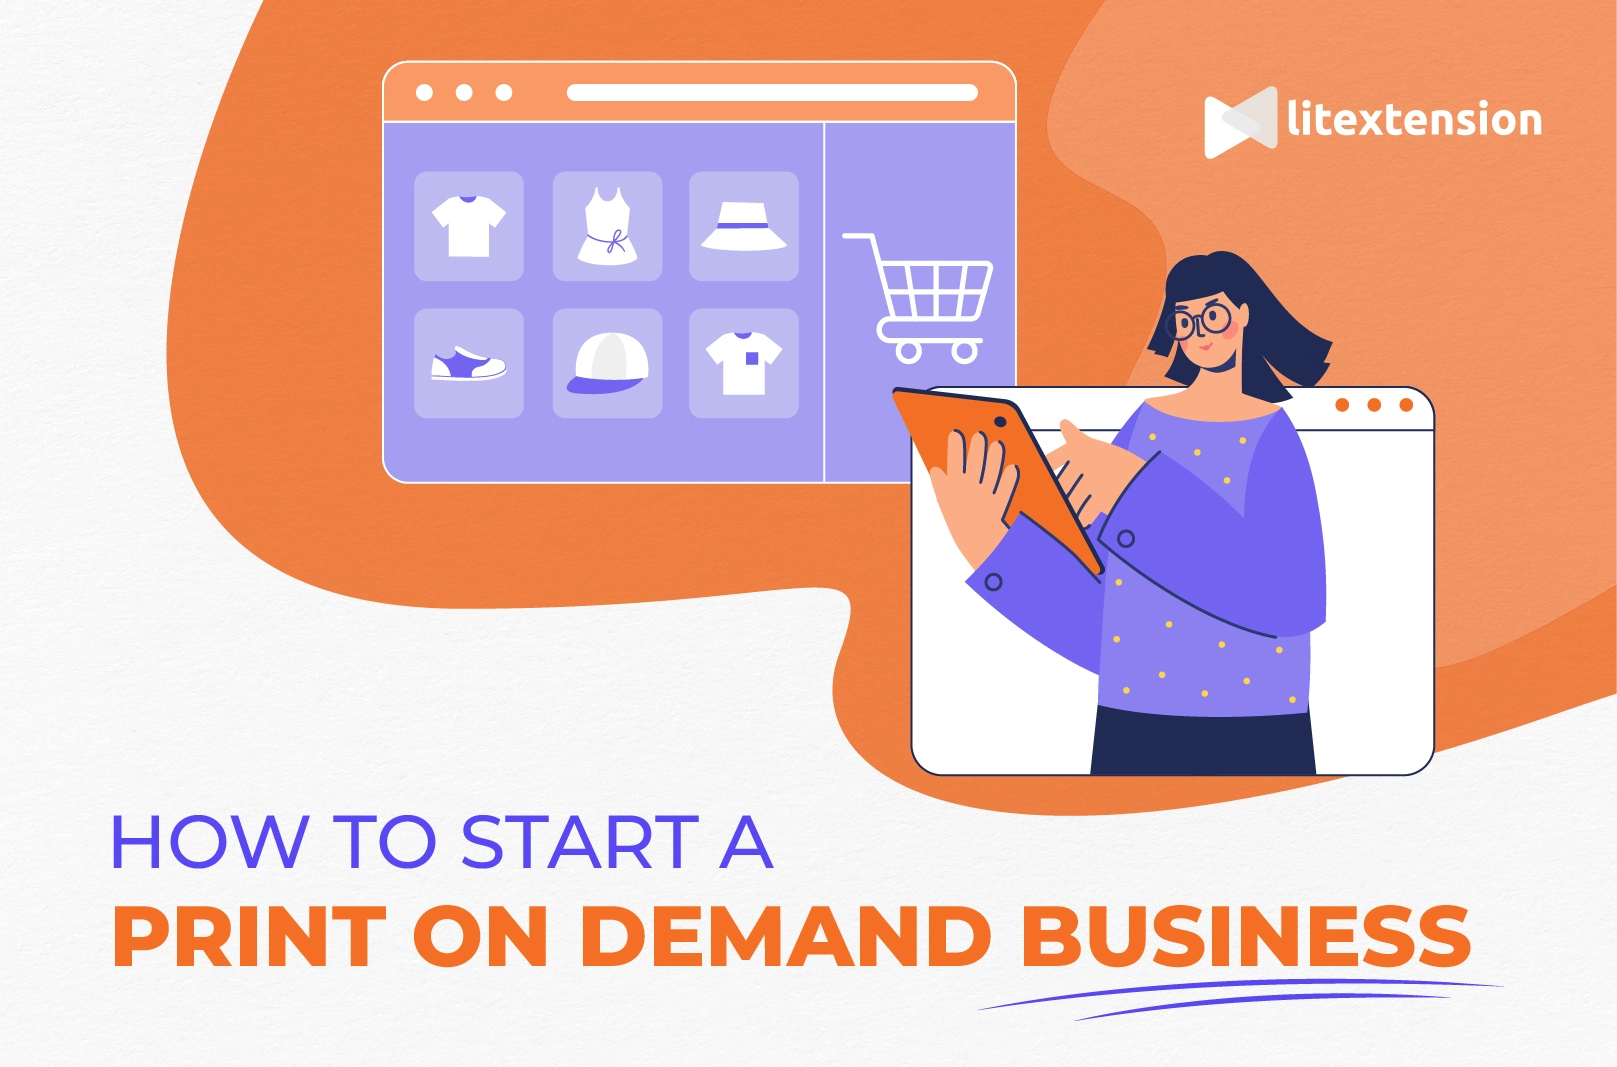 How to Start a Print on Demand Business